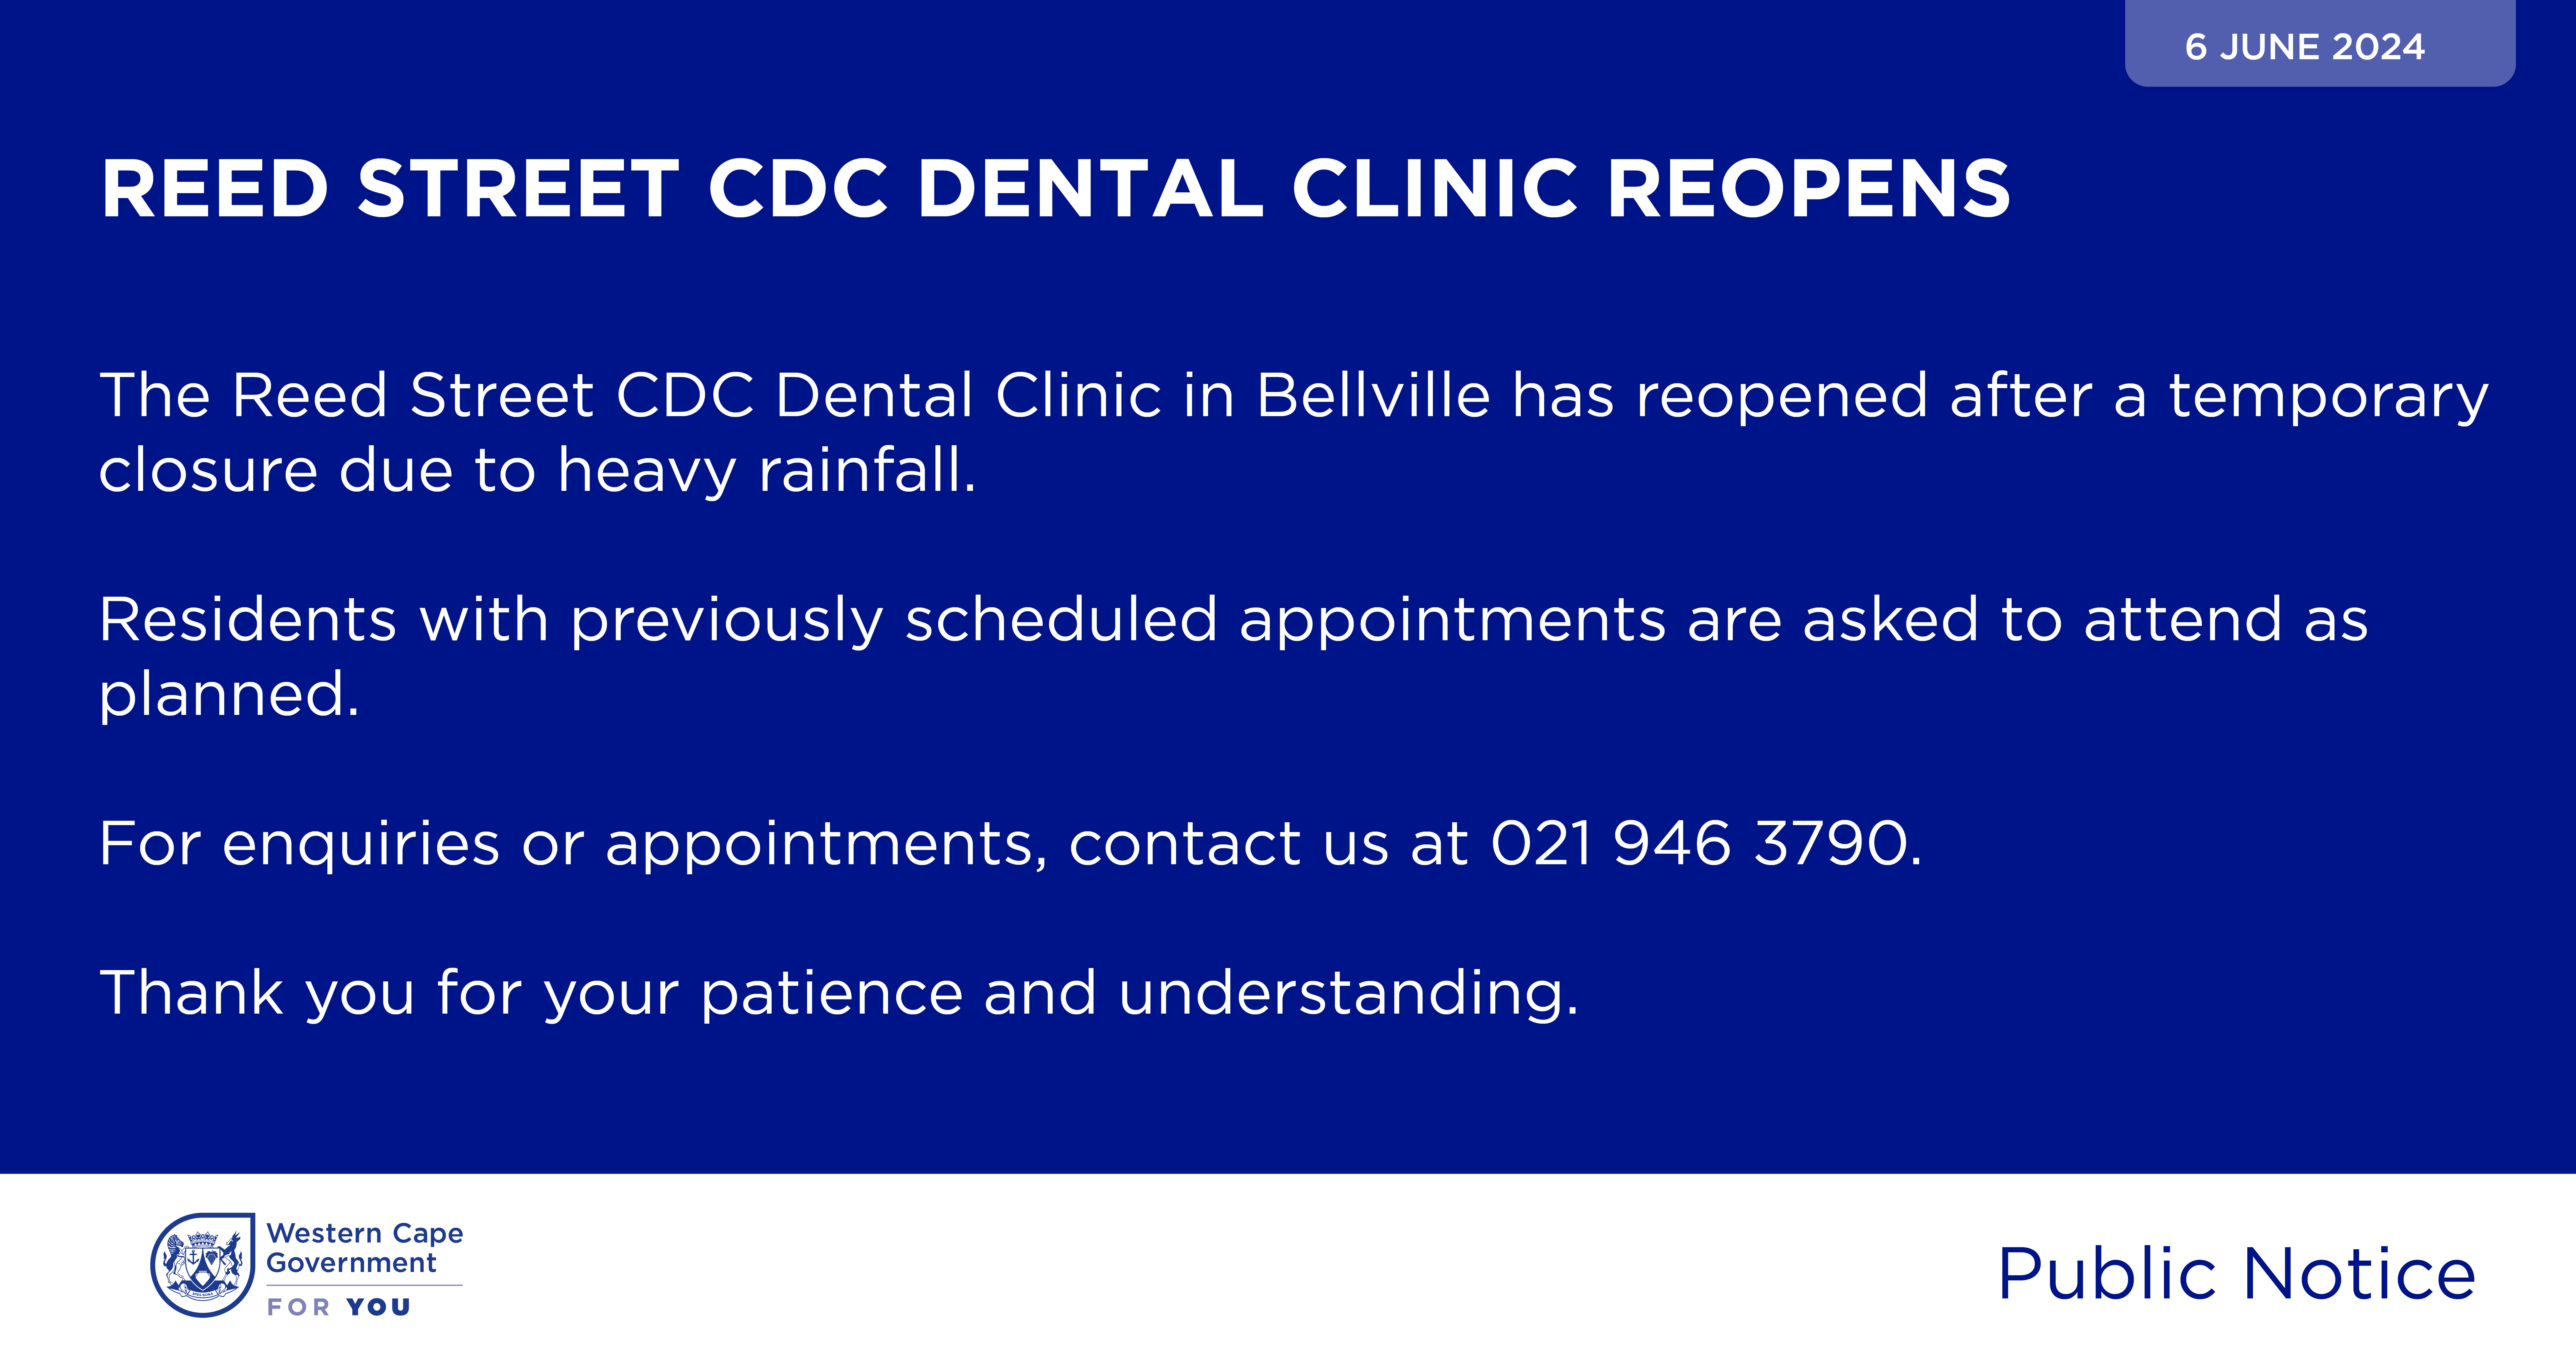 PUBLIC NOTICE: Reed Street CDC Dental Clinic reopens